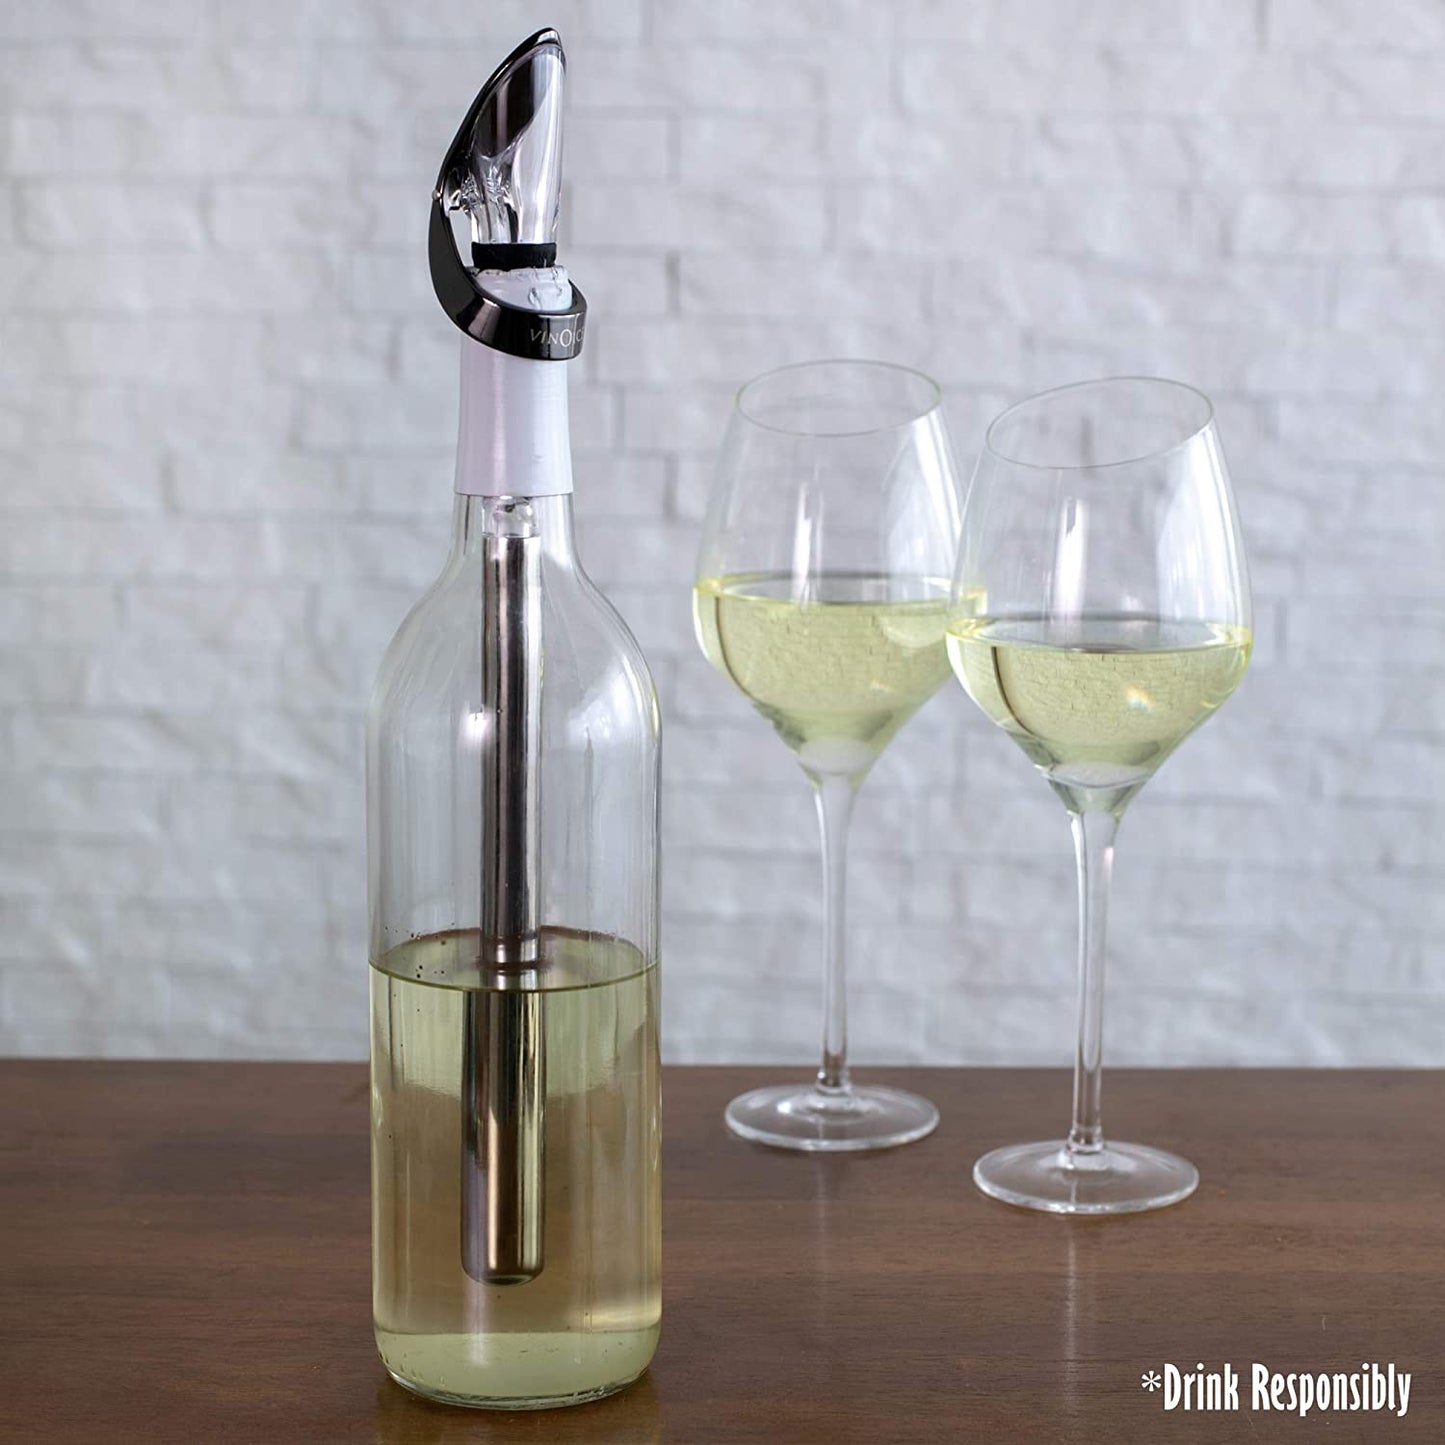 Vinoice Wine Chiller and Pourer